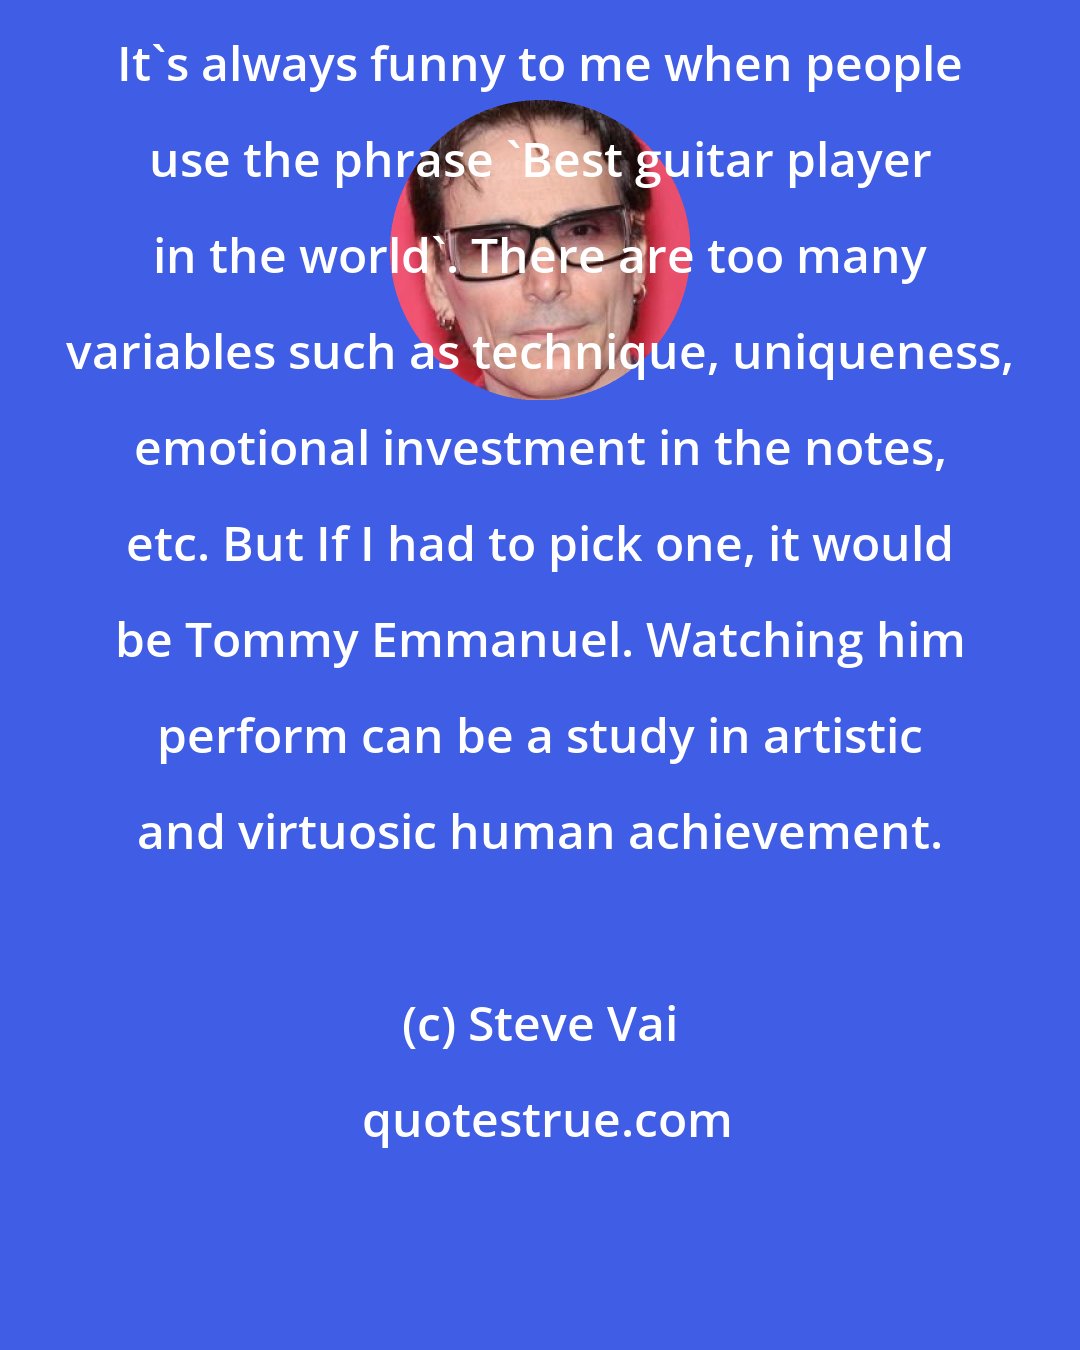 Steve Vai: It's always funny to me when people use the phrase 'Best guitar player in the world'. There are too many variables such as technique, uniqueness, emotional investment in the notes, etc. But If I had to pick one, it would be Tommy Emmanuel. Watching him perform can be a study in artistic and virtuosic human achievement.